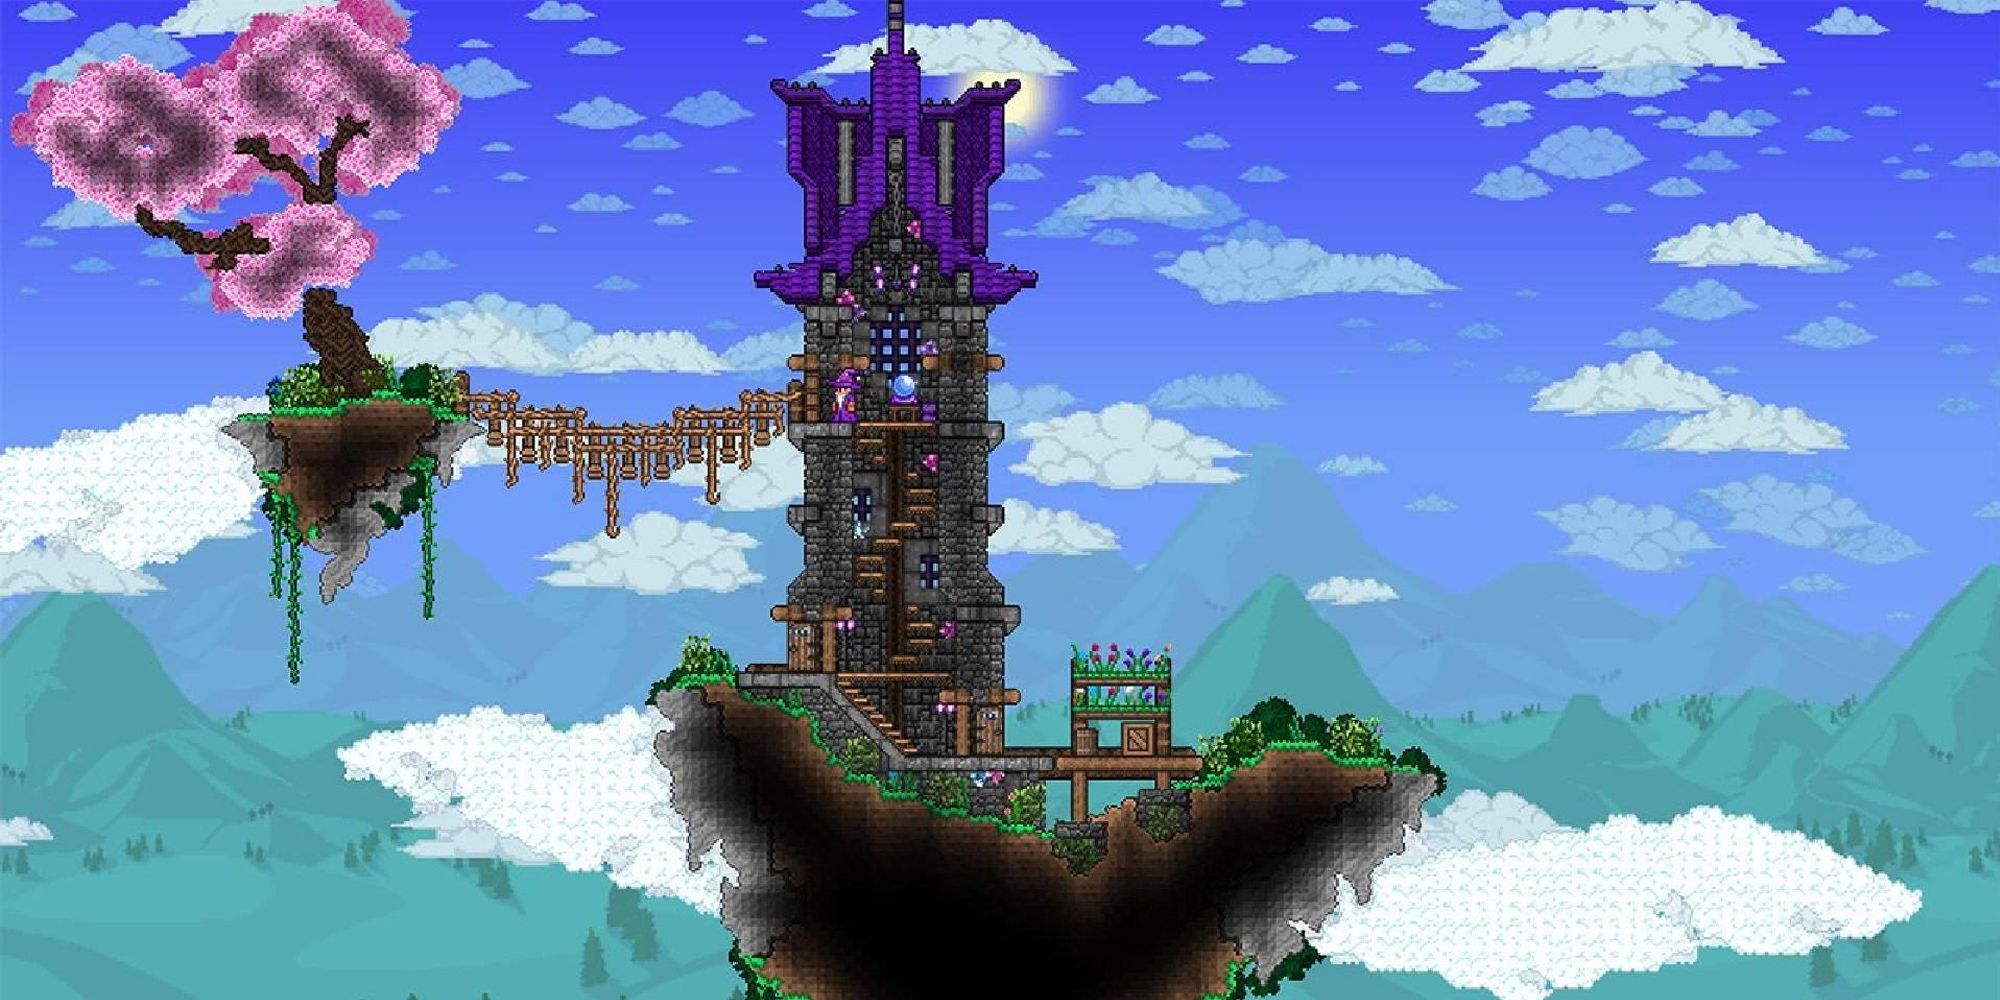 Building A Tower That Reaches The Clouds